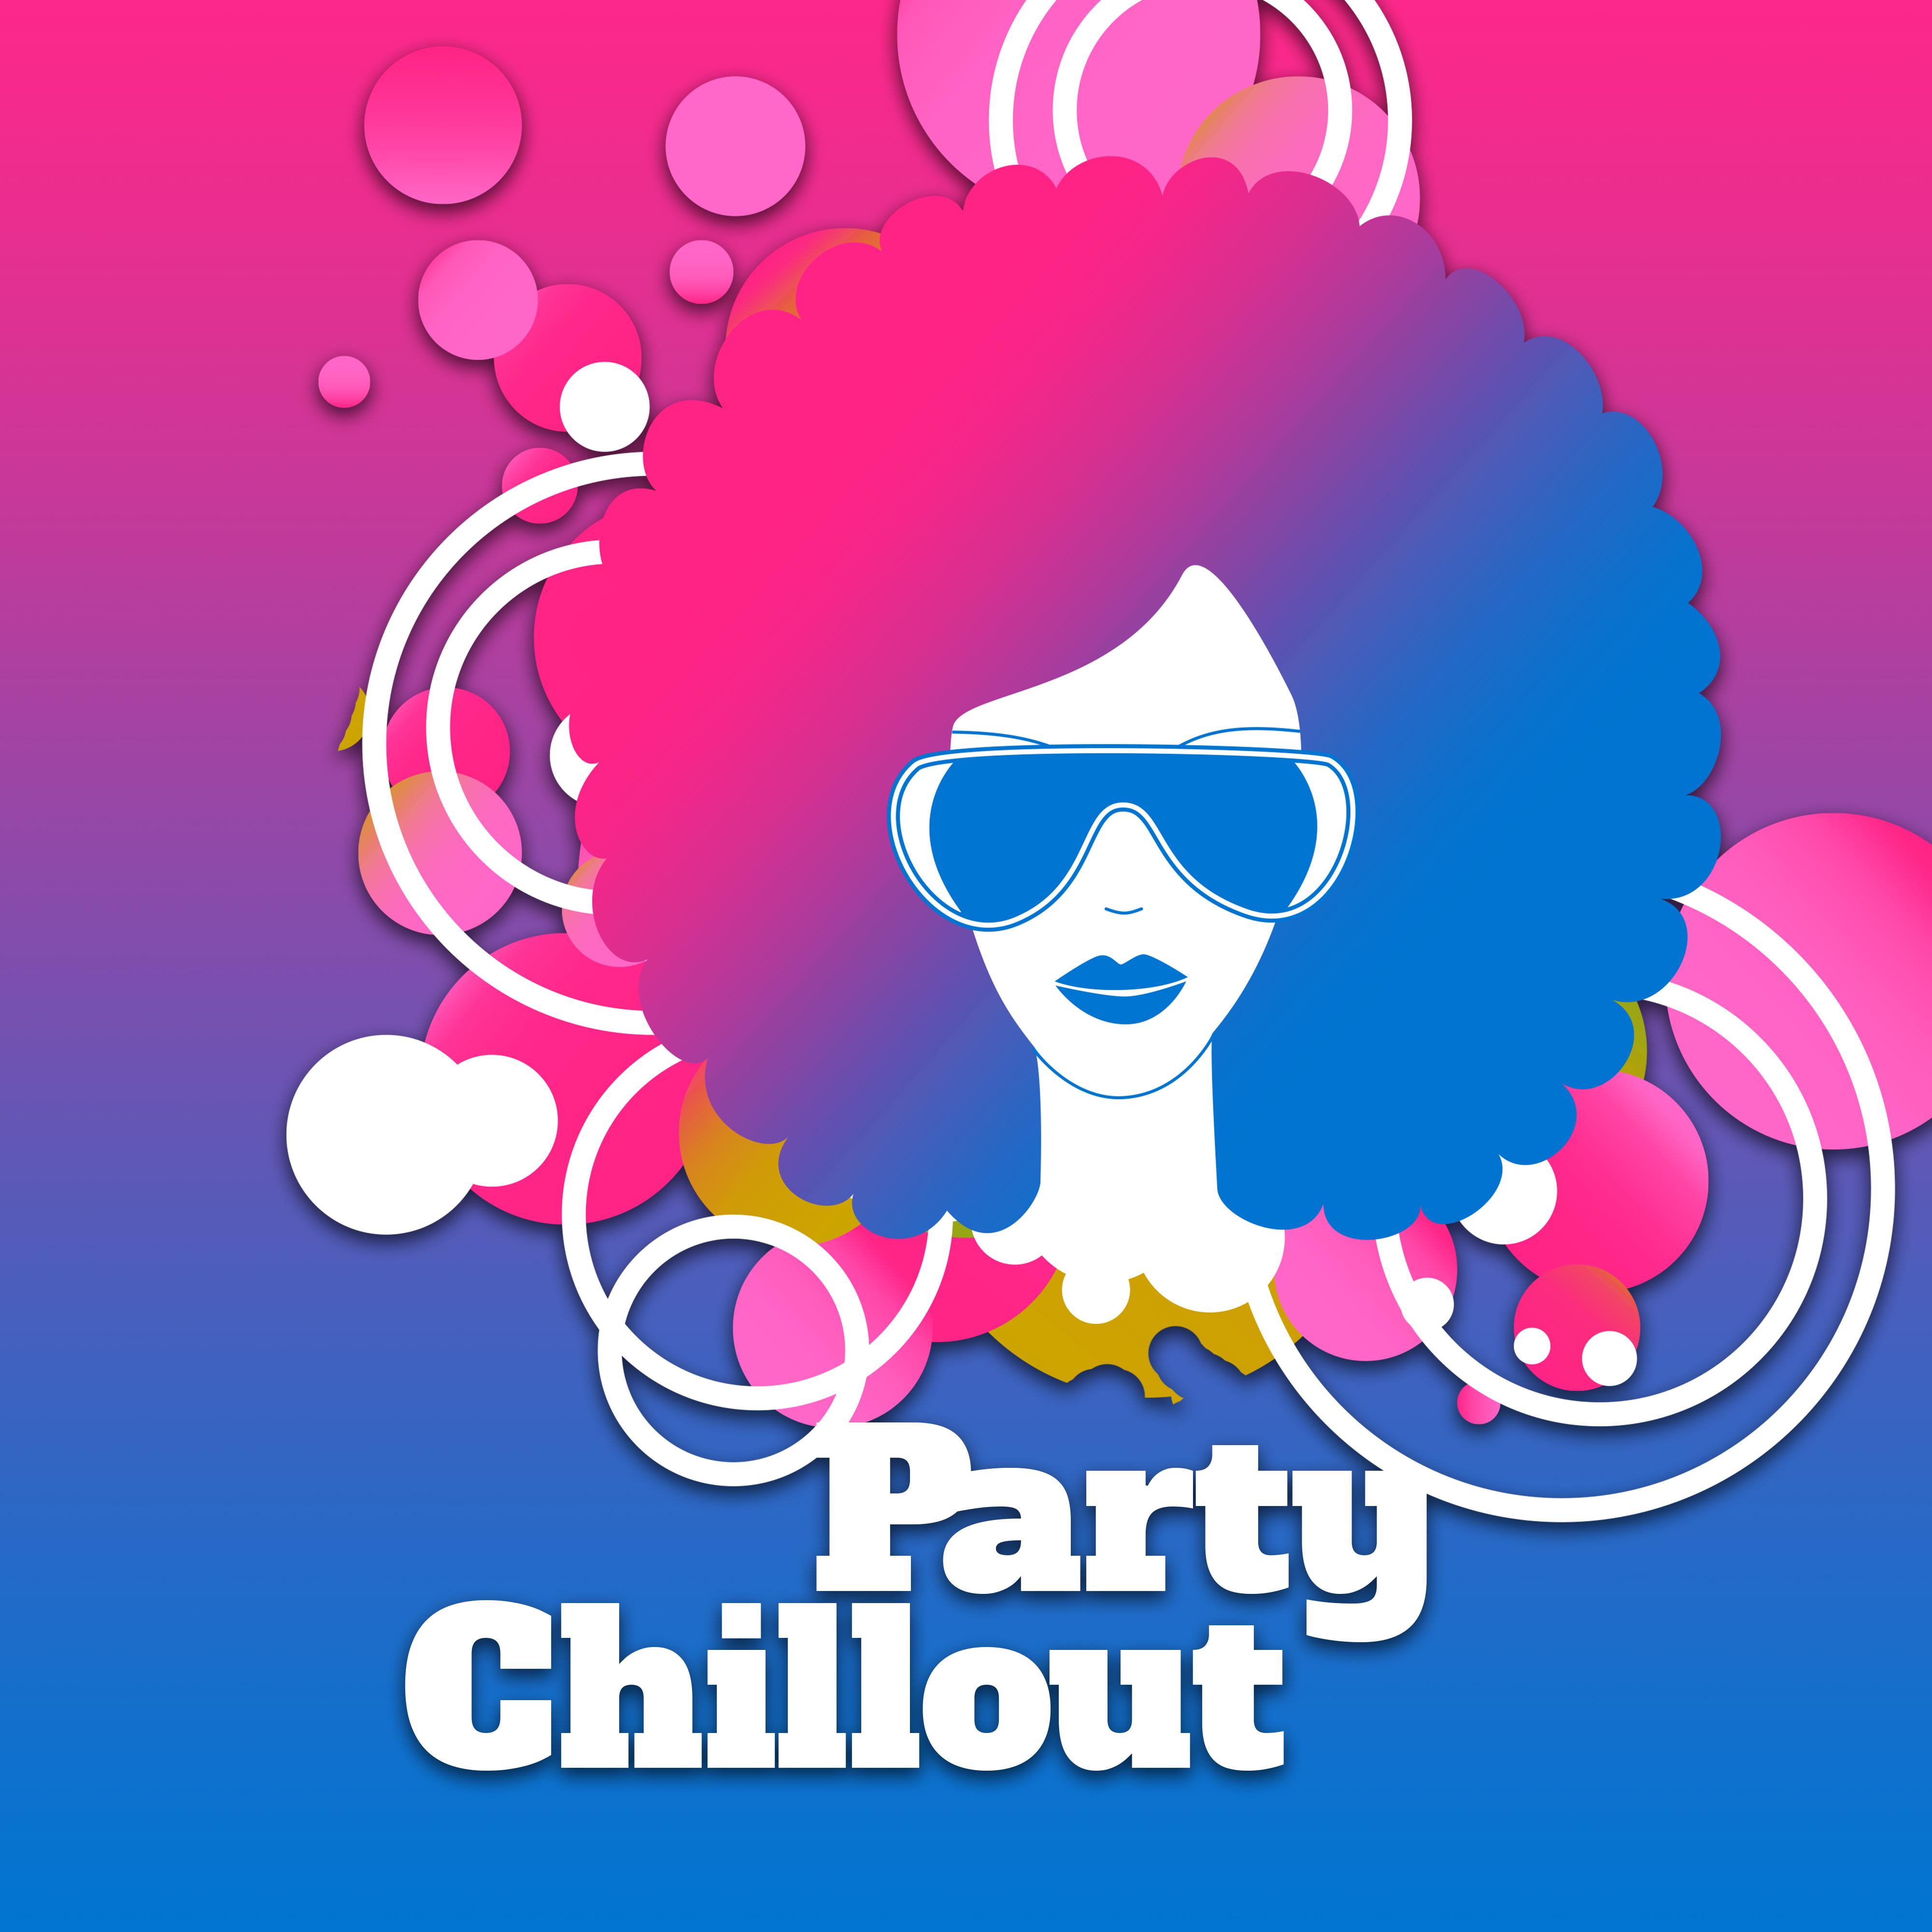 Party Chillout – **** Vibes, Cool Summer Time, Beach Music, Chill Paradise, Erotic Dance, Hot Party Ibiza